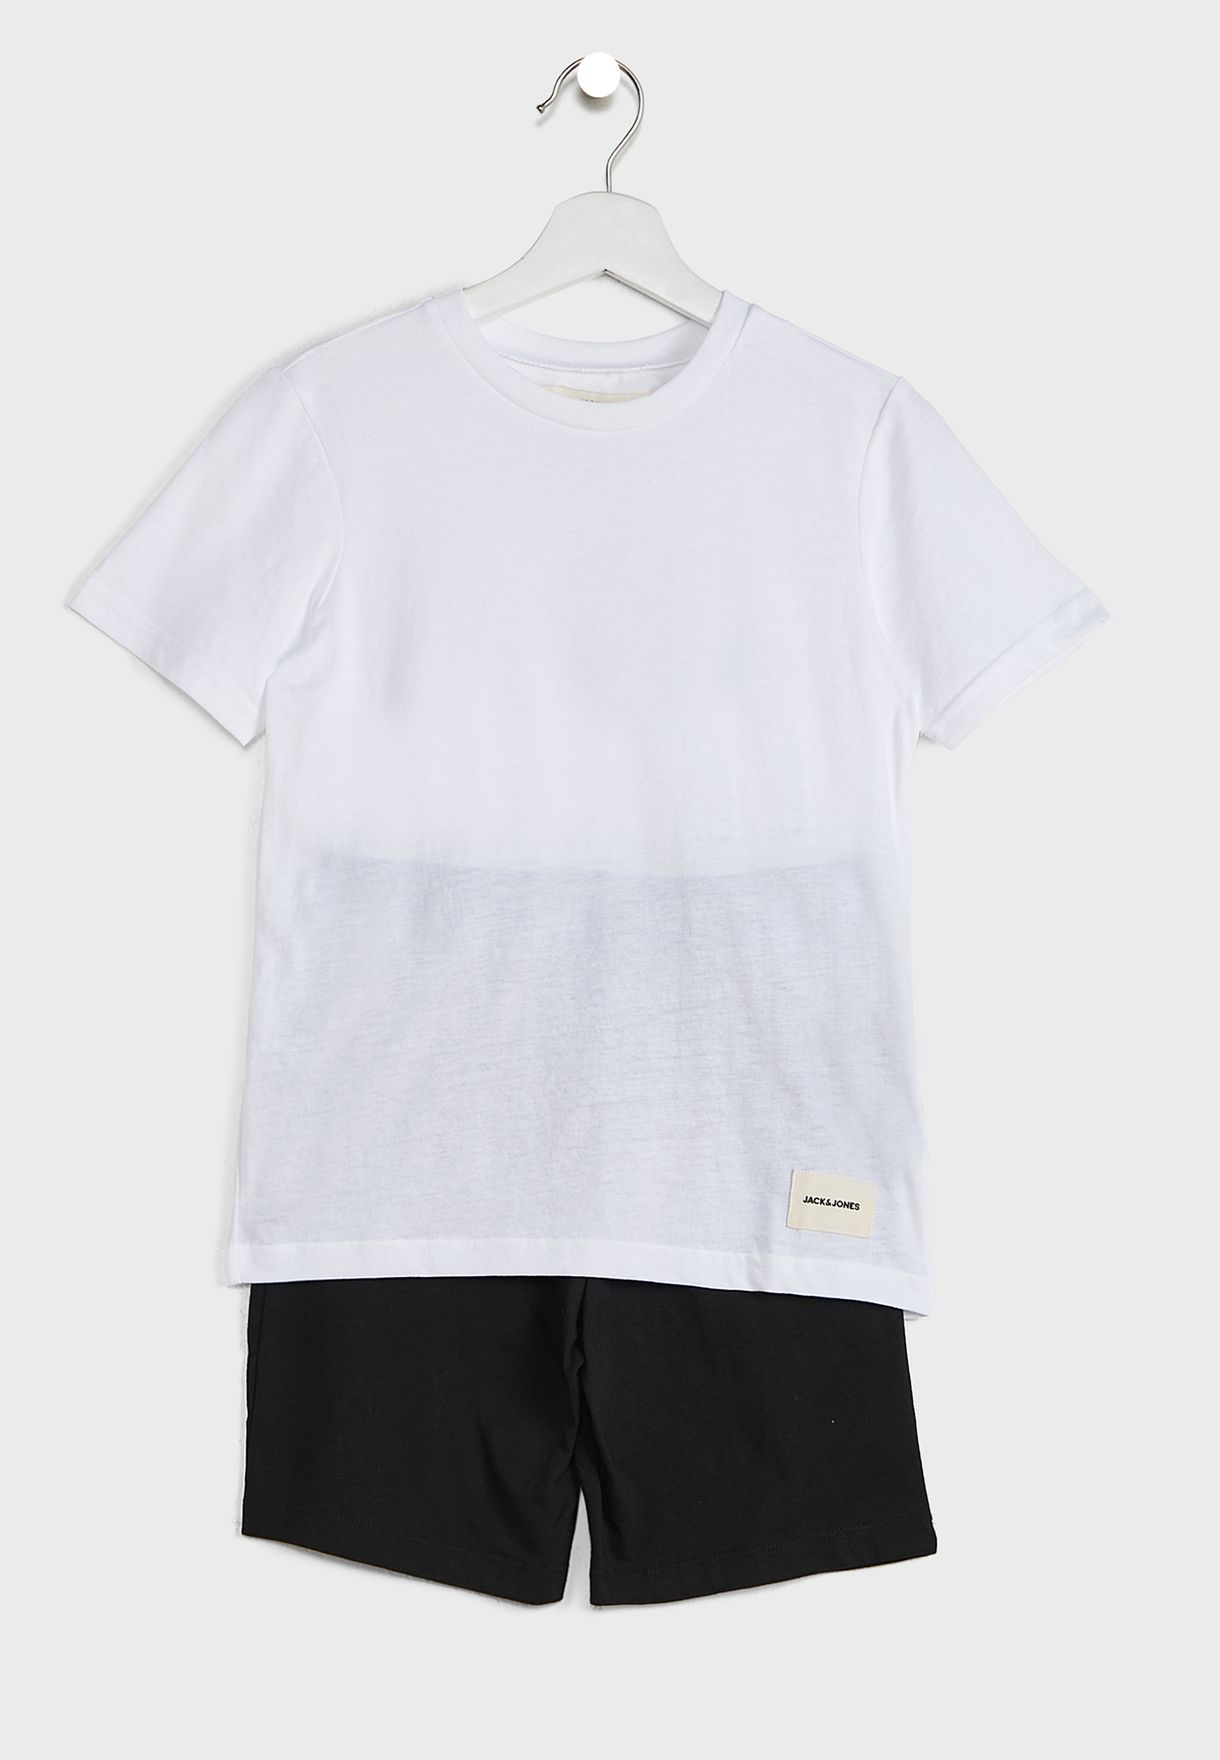 Youth Essential T-Shirt Shorts Set